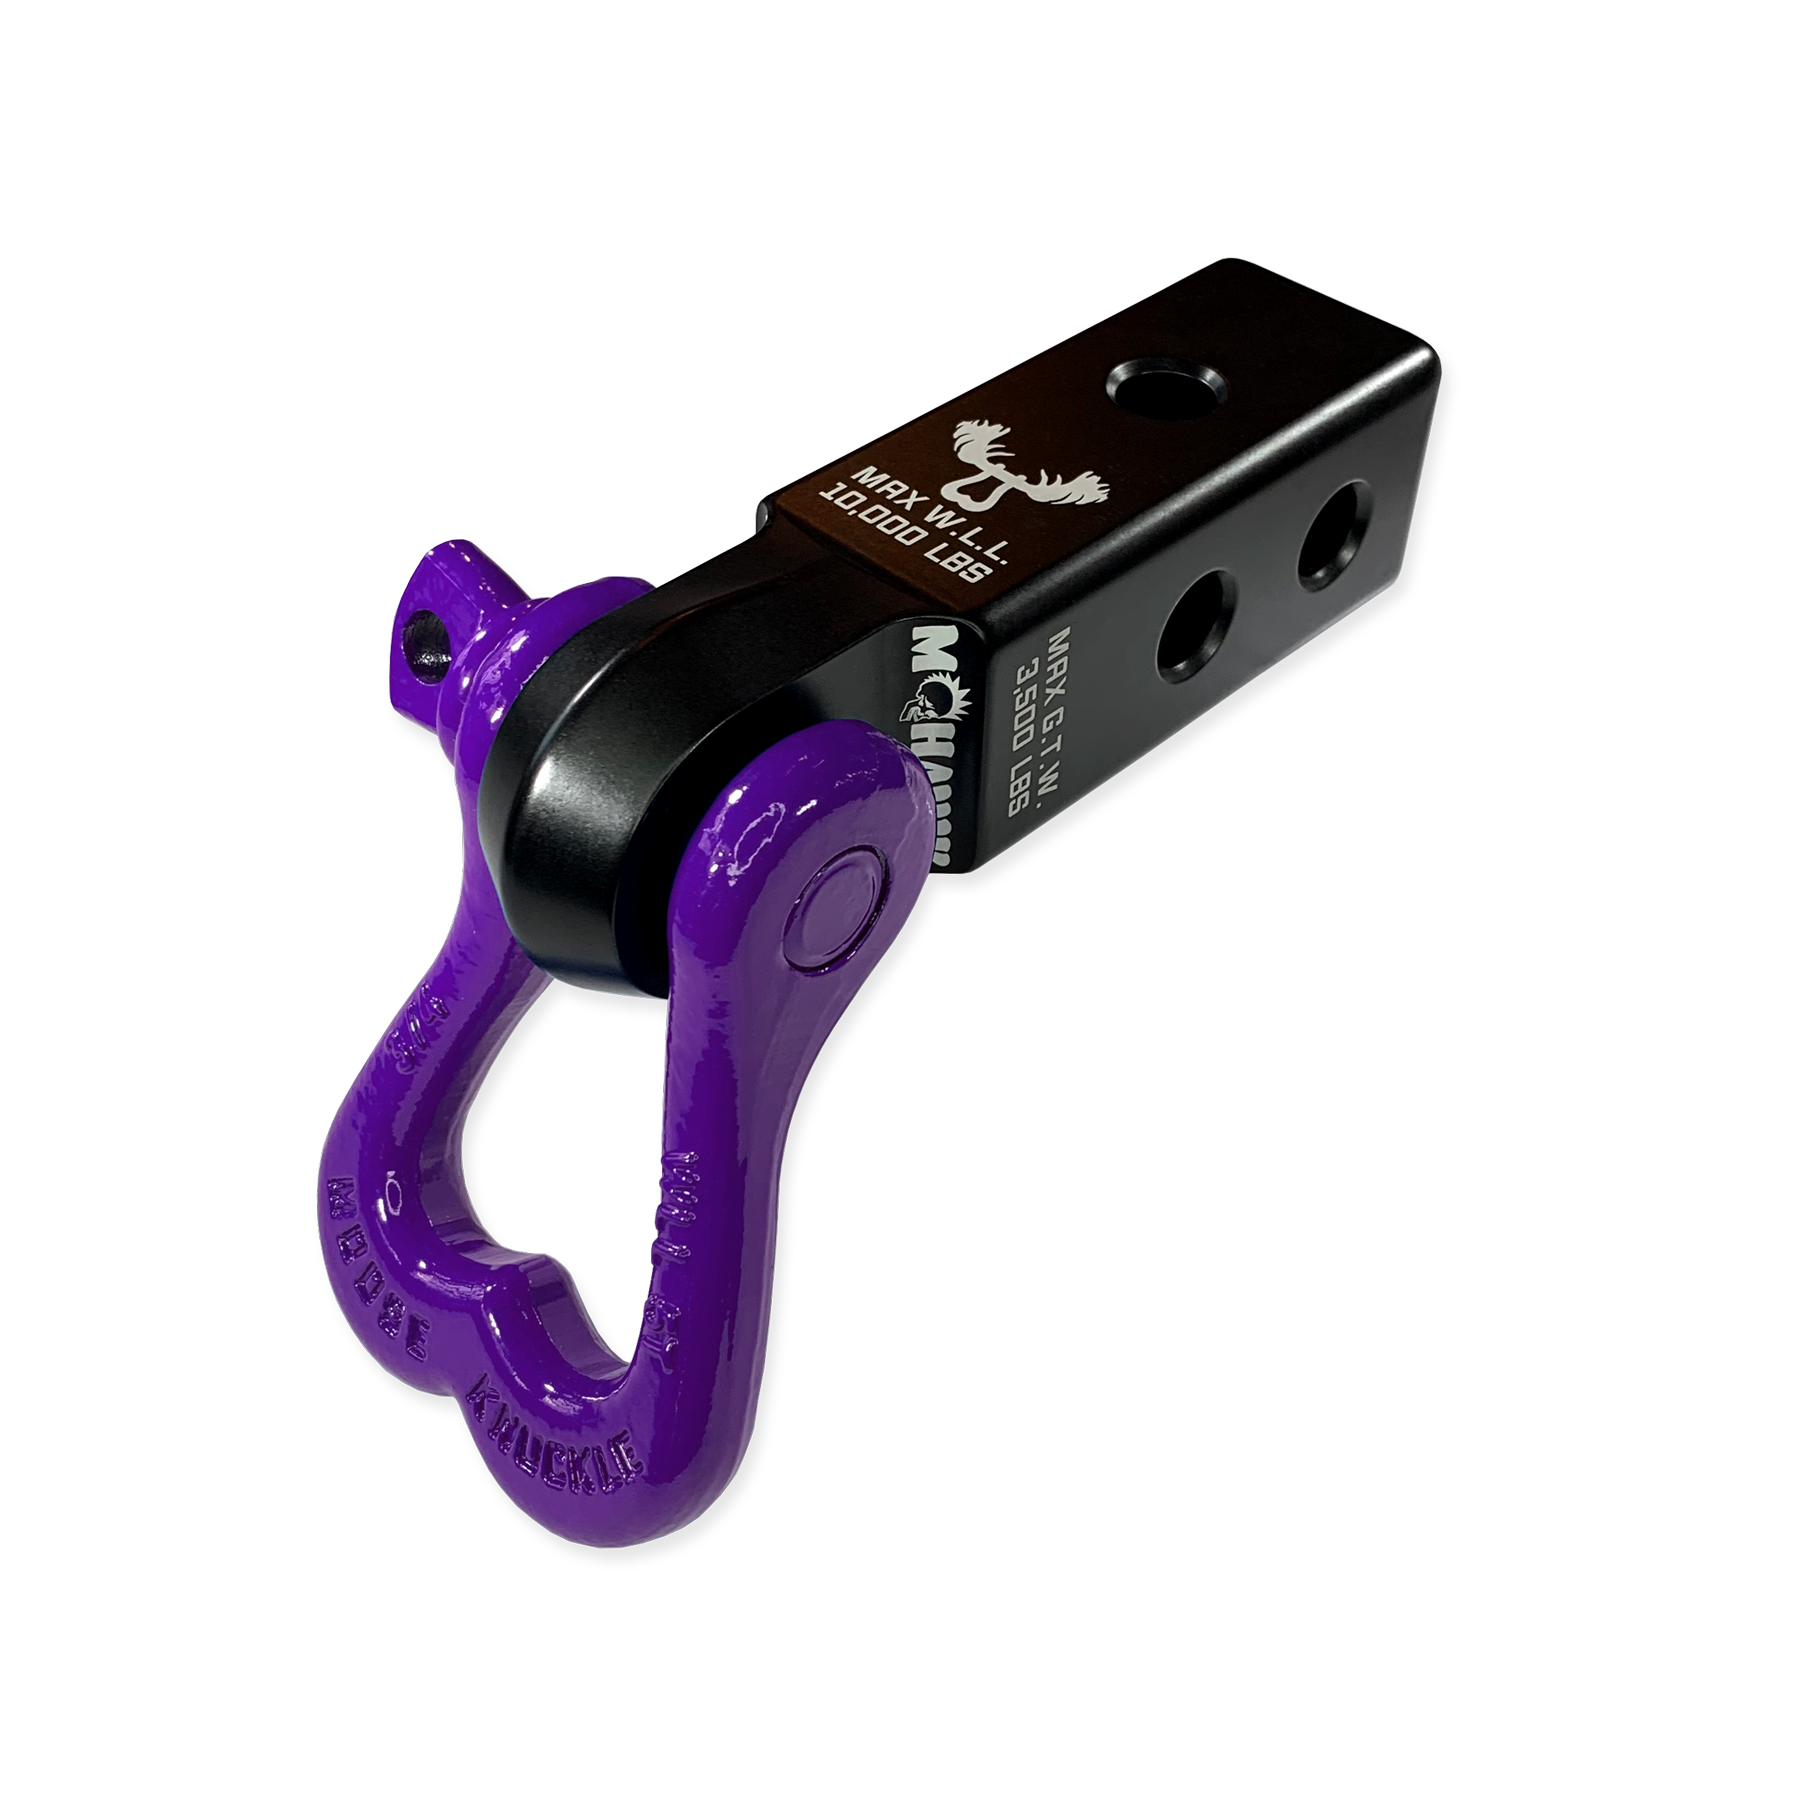 Moose Knuckle Offroad XL Grape Escape 3/4" Purple D-Ring Shackle and Black Lung Mohawk 2.0 Shackle Receiver Combo for off-roading vehicle recovery and towing.